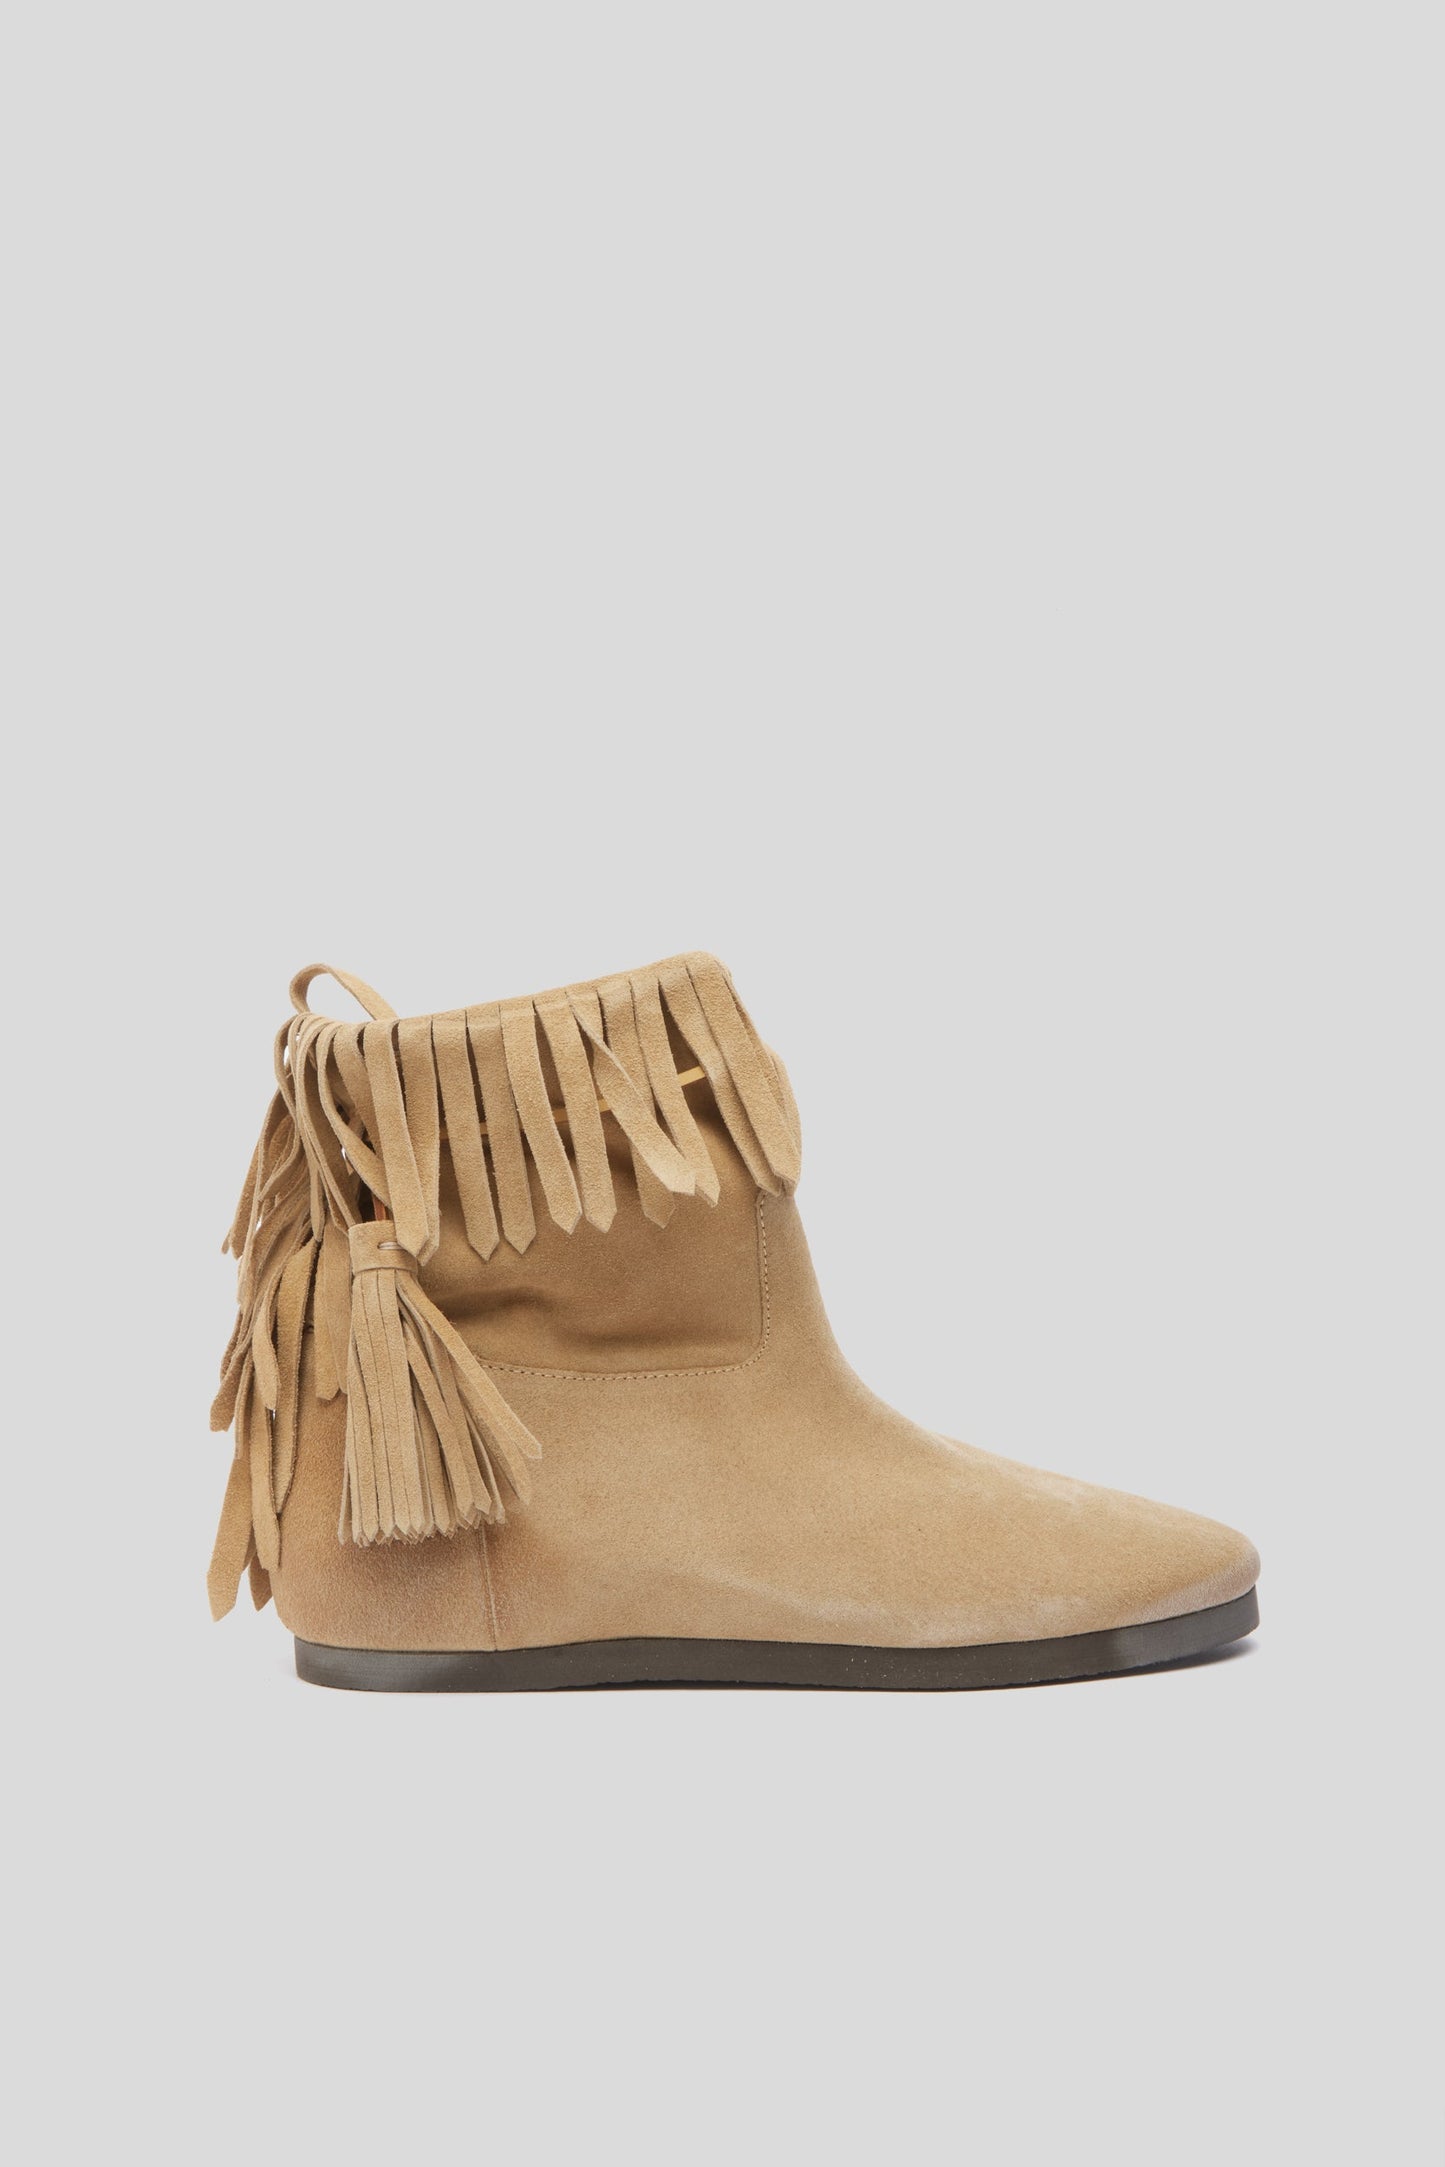 TWINSET Beige Suede and Fringes Ankle Boots